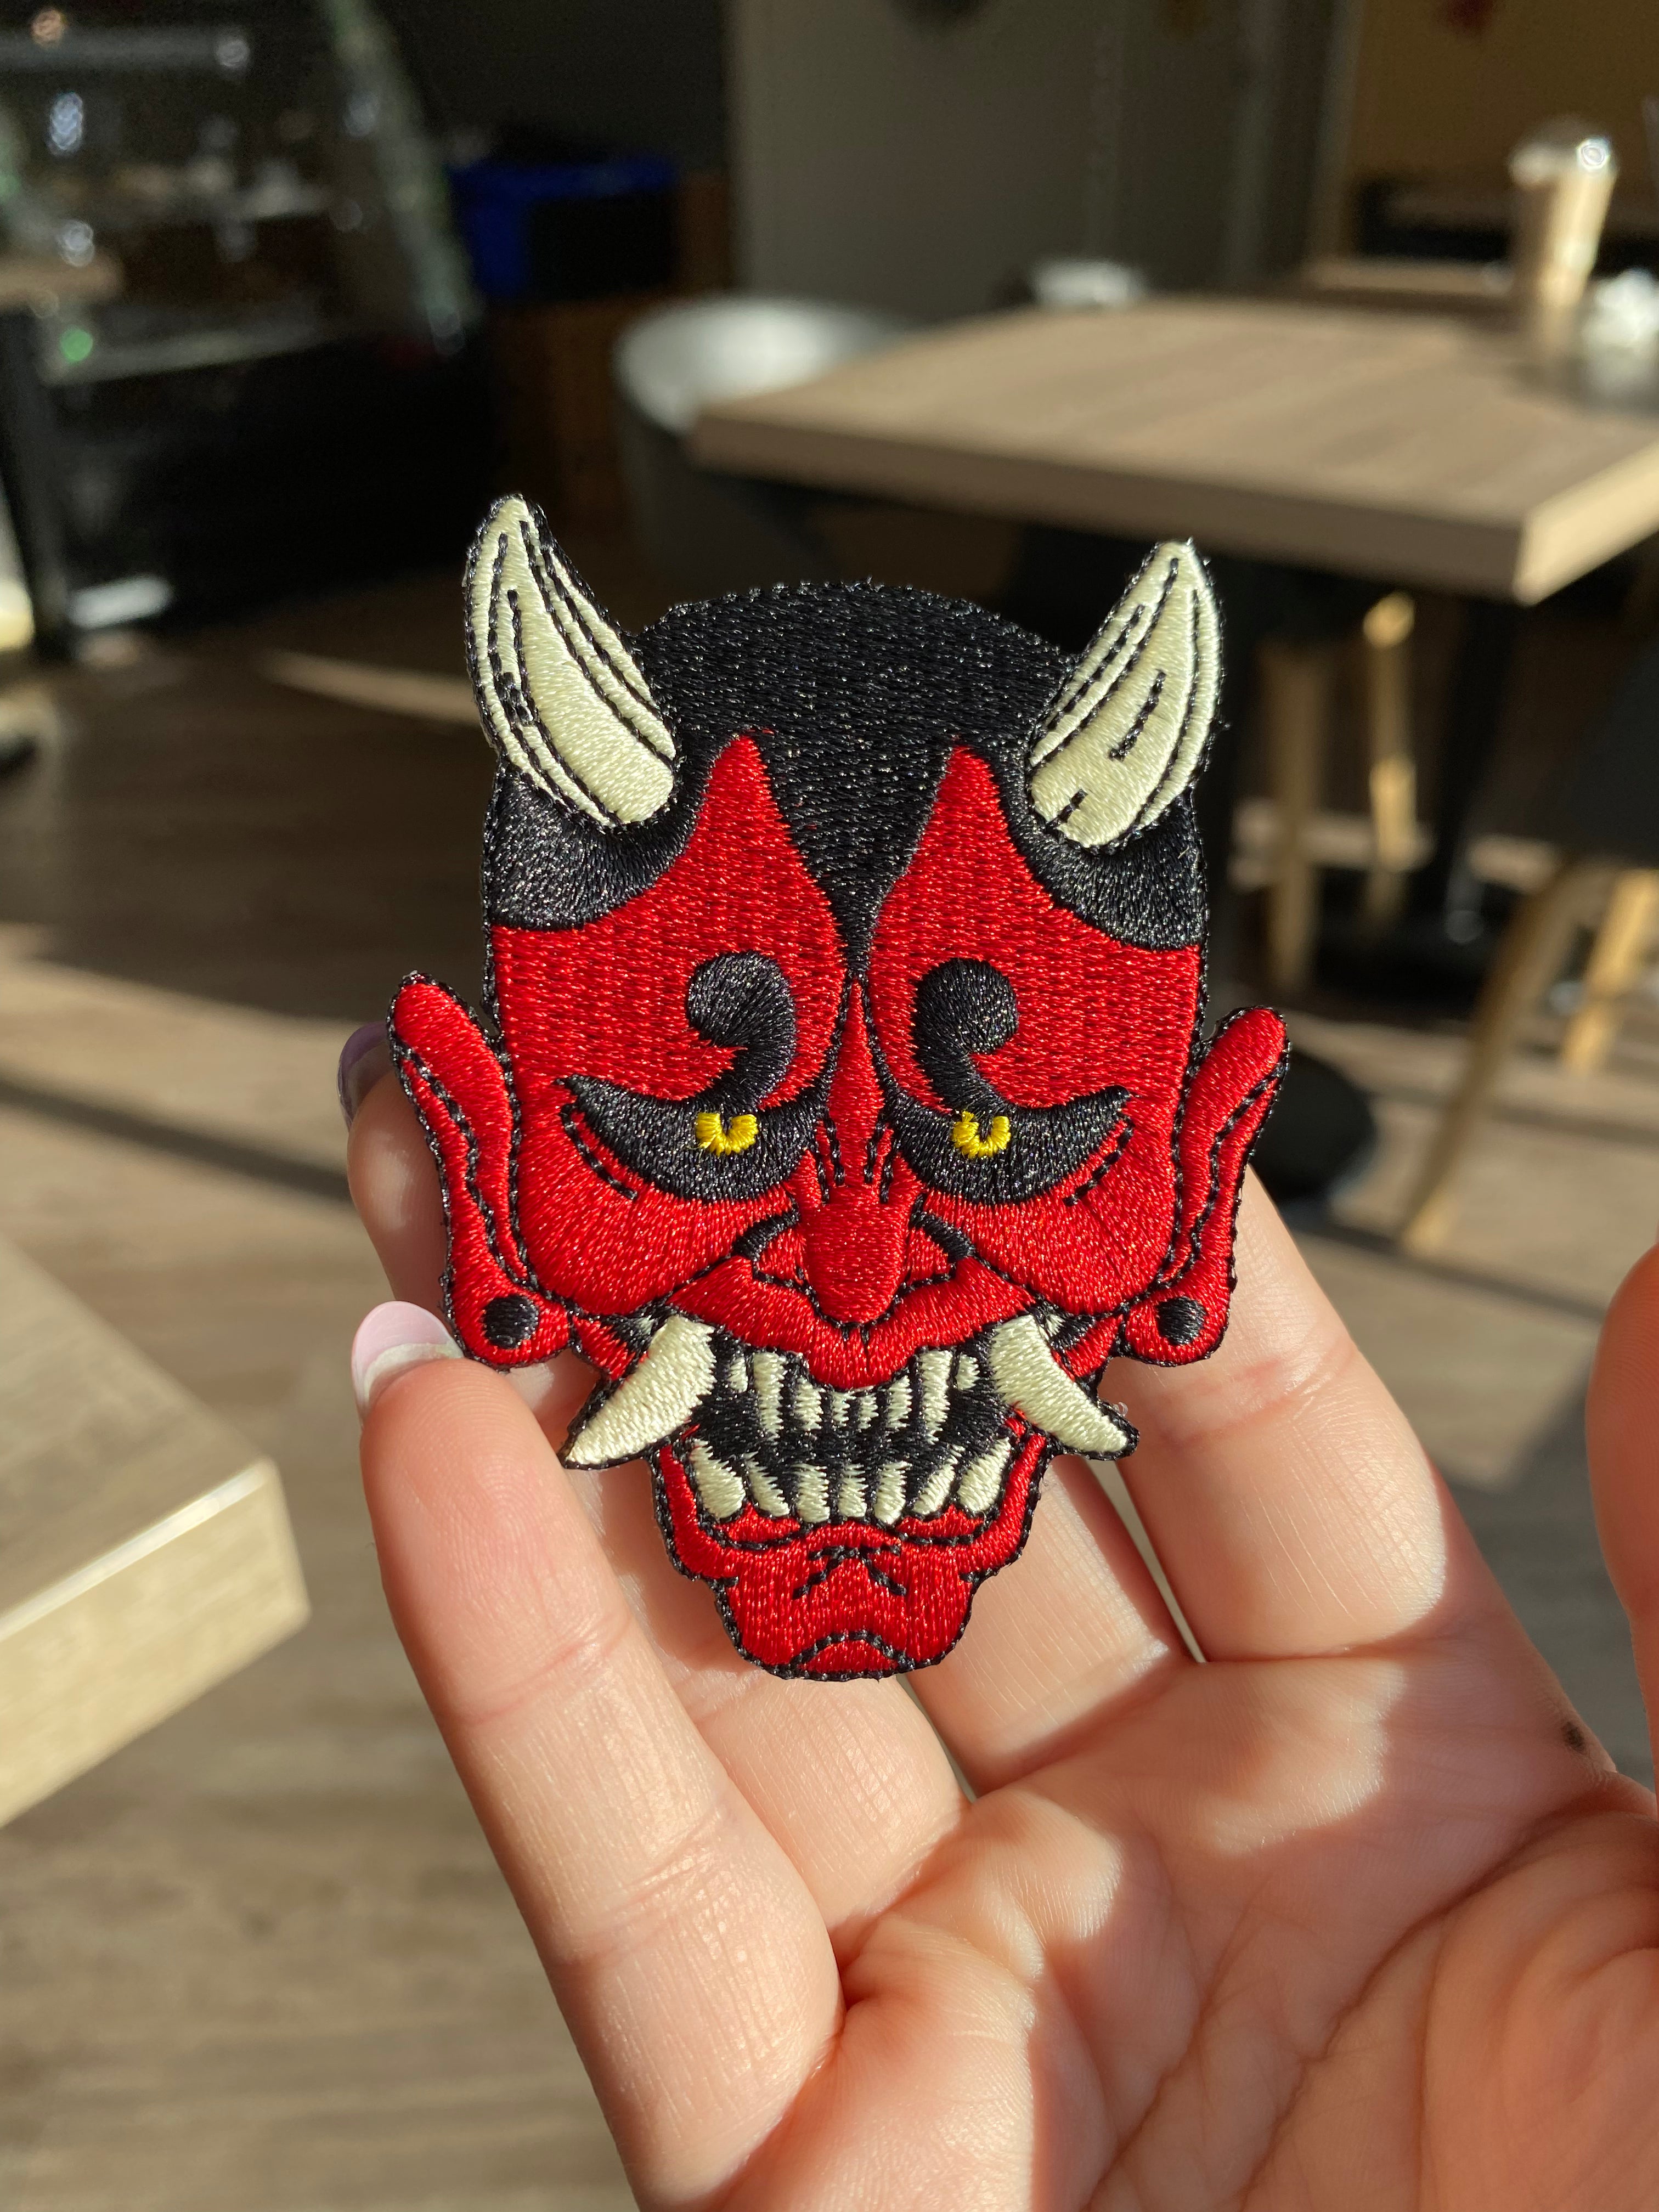 Red Oni Demon Iron On Patch